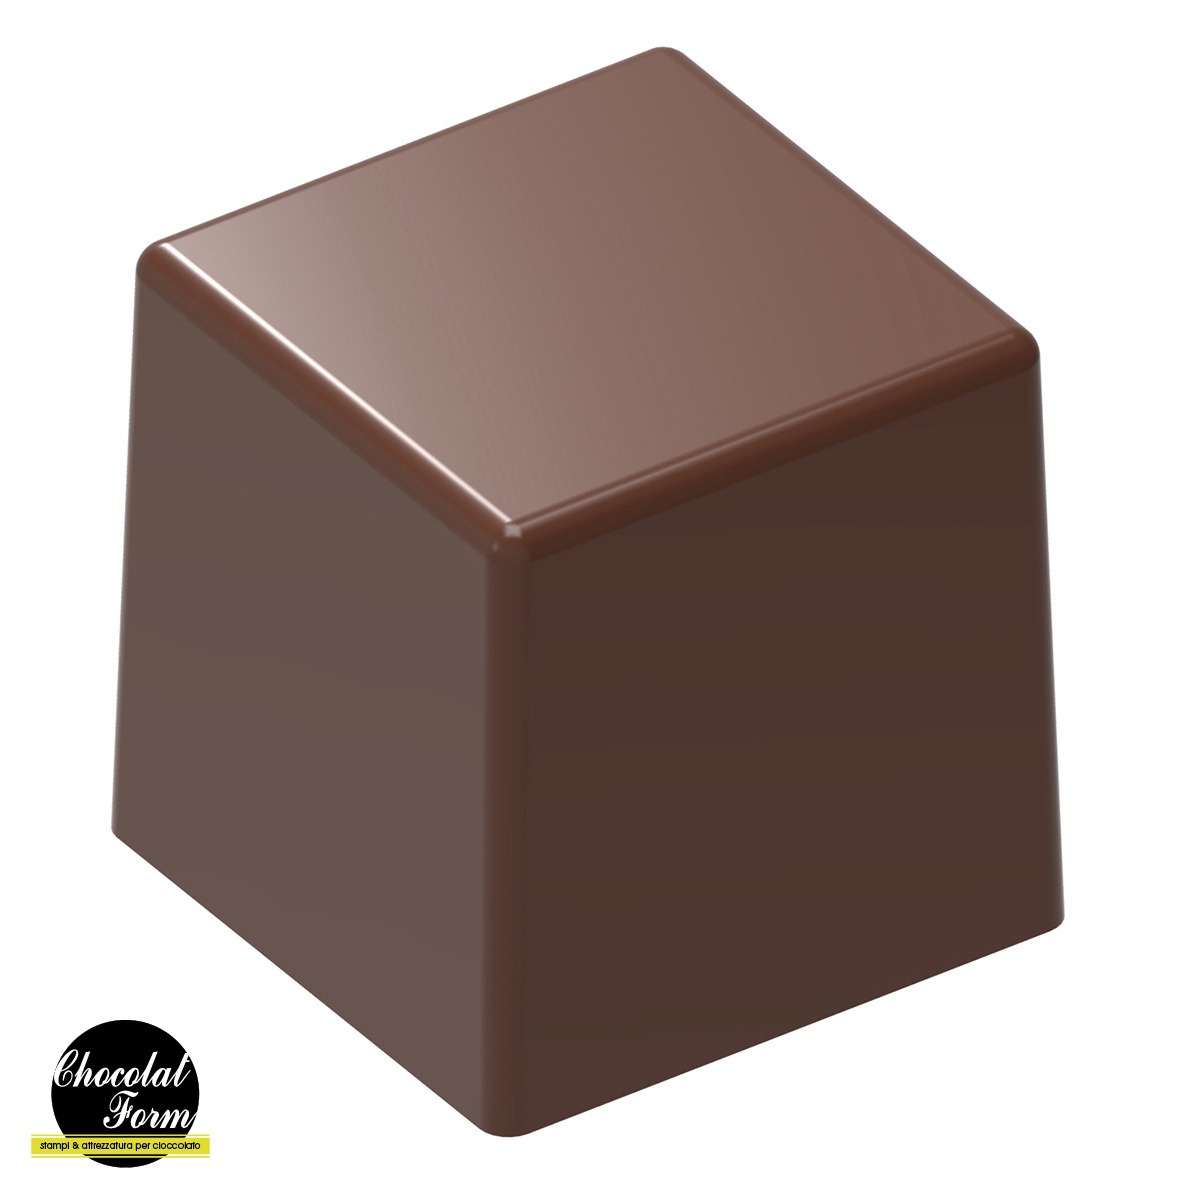 Matfer (380122) 32 Compartment Wooden Square Chocolate Mold